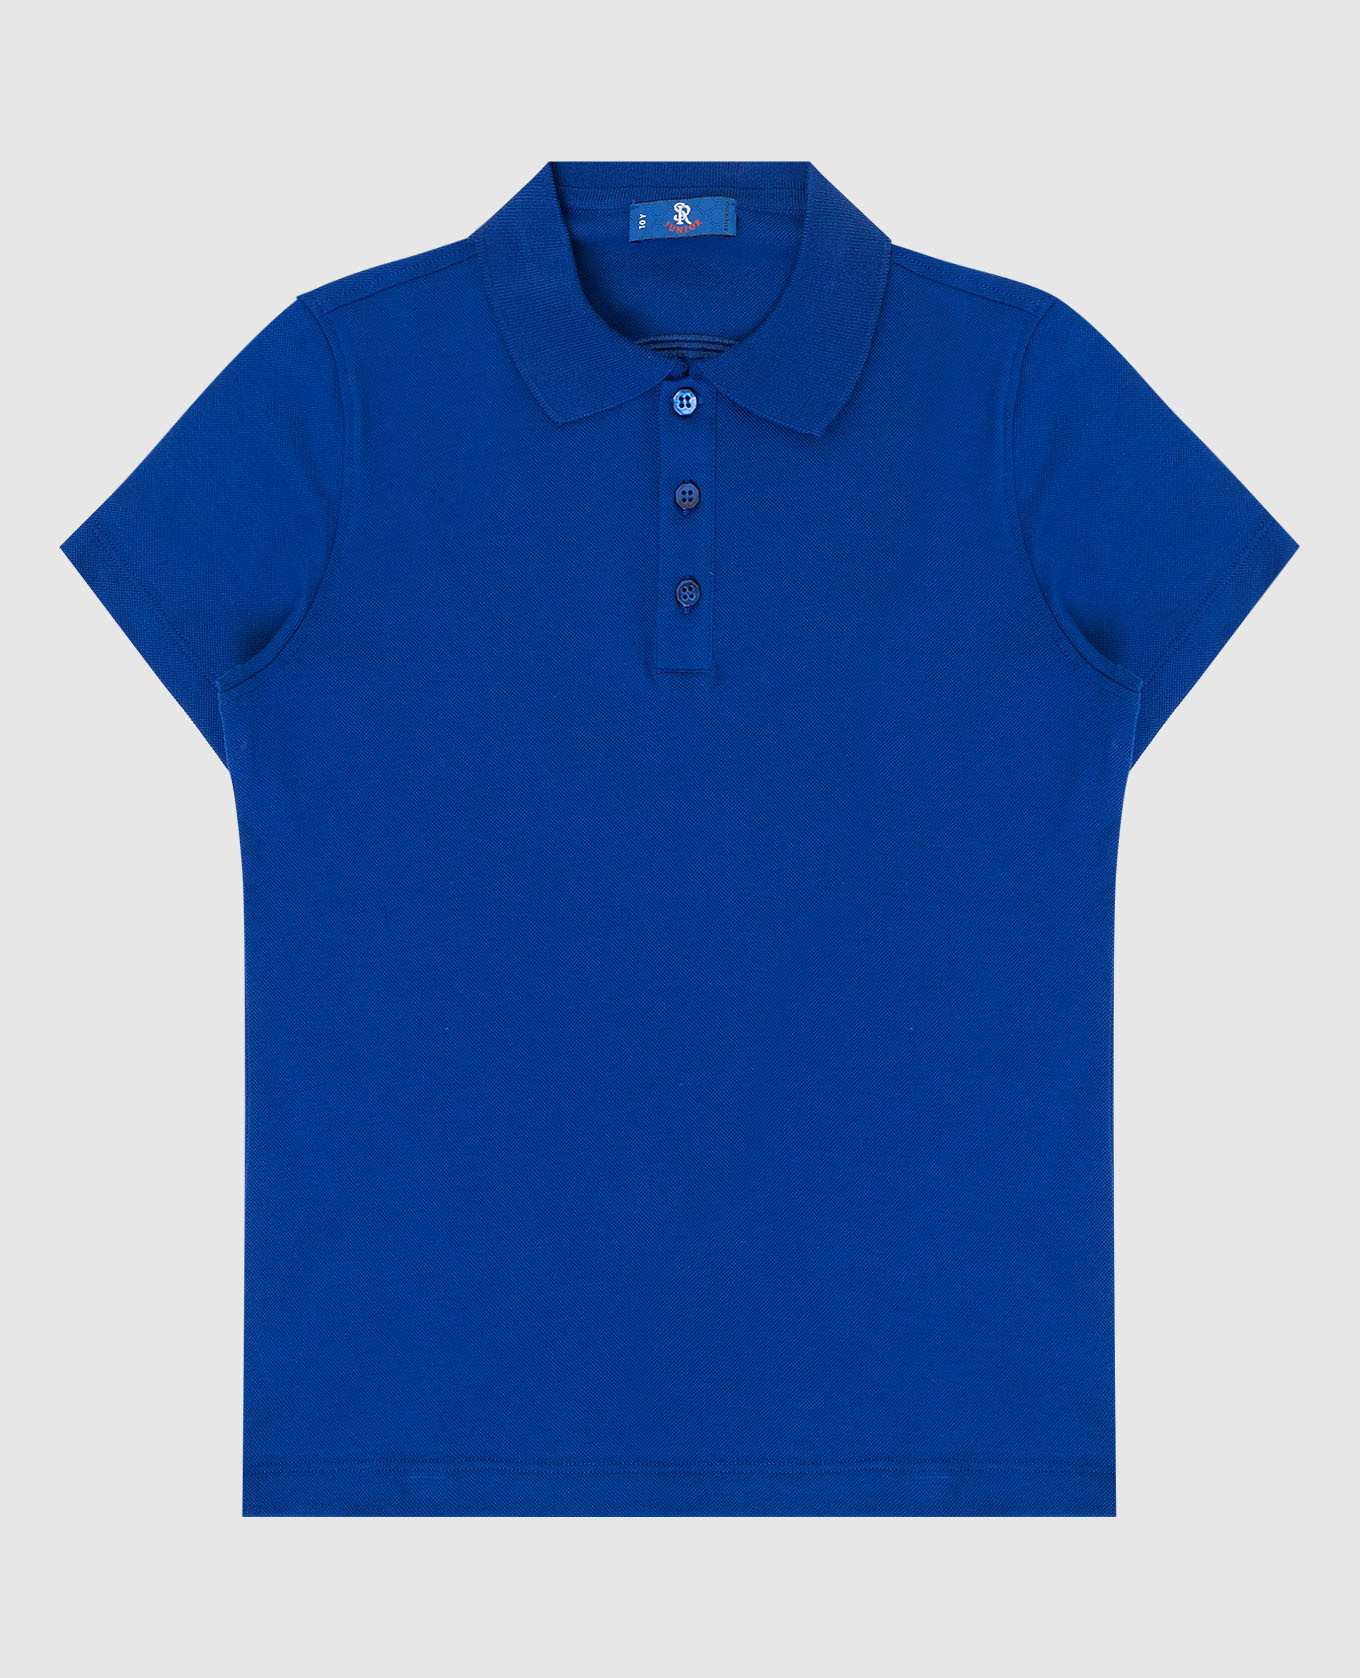 Children's blue polo with embroidery